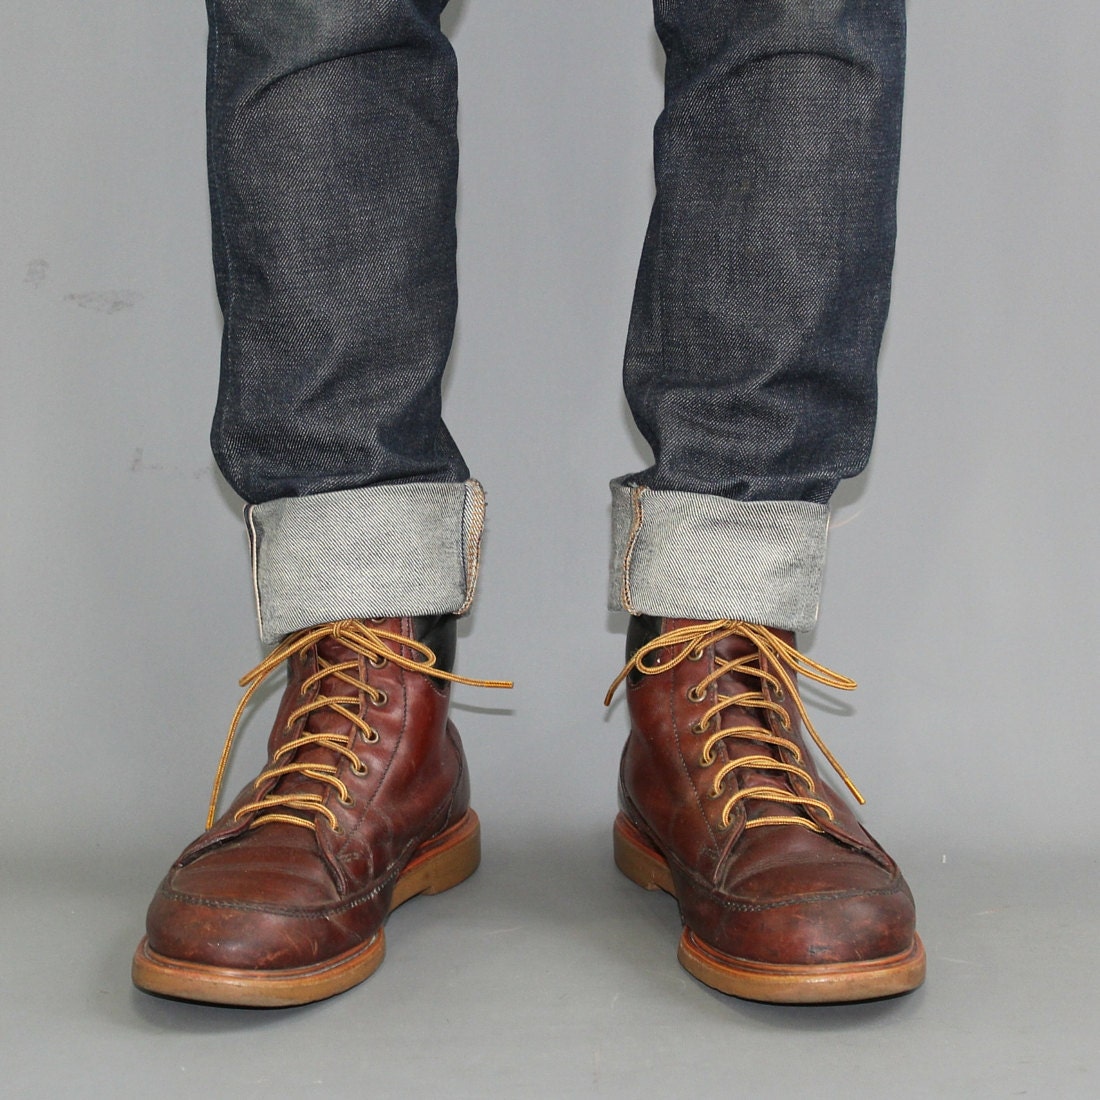 red wing boots vintage